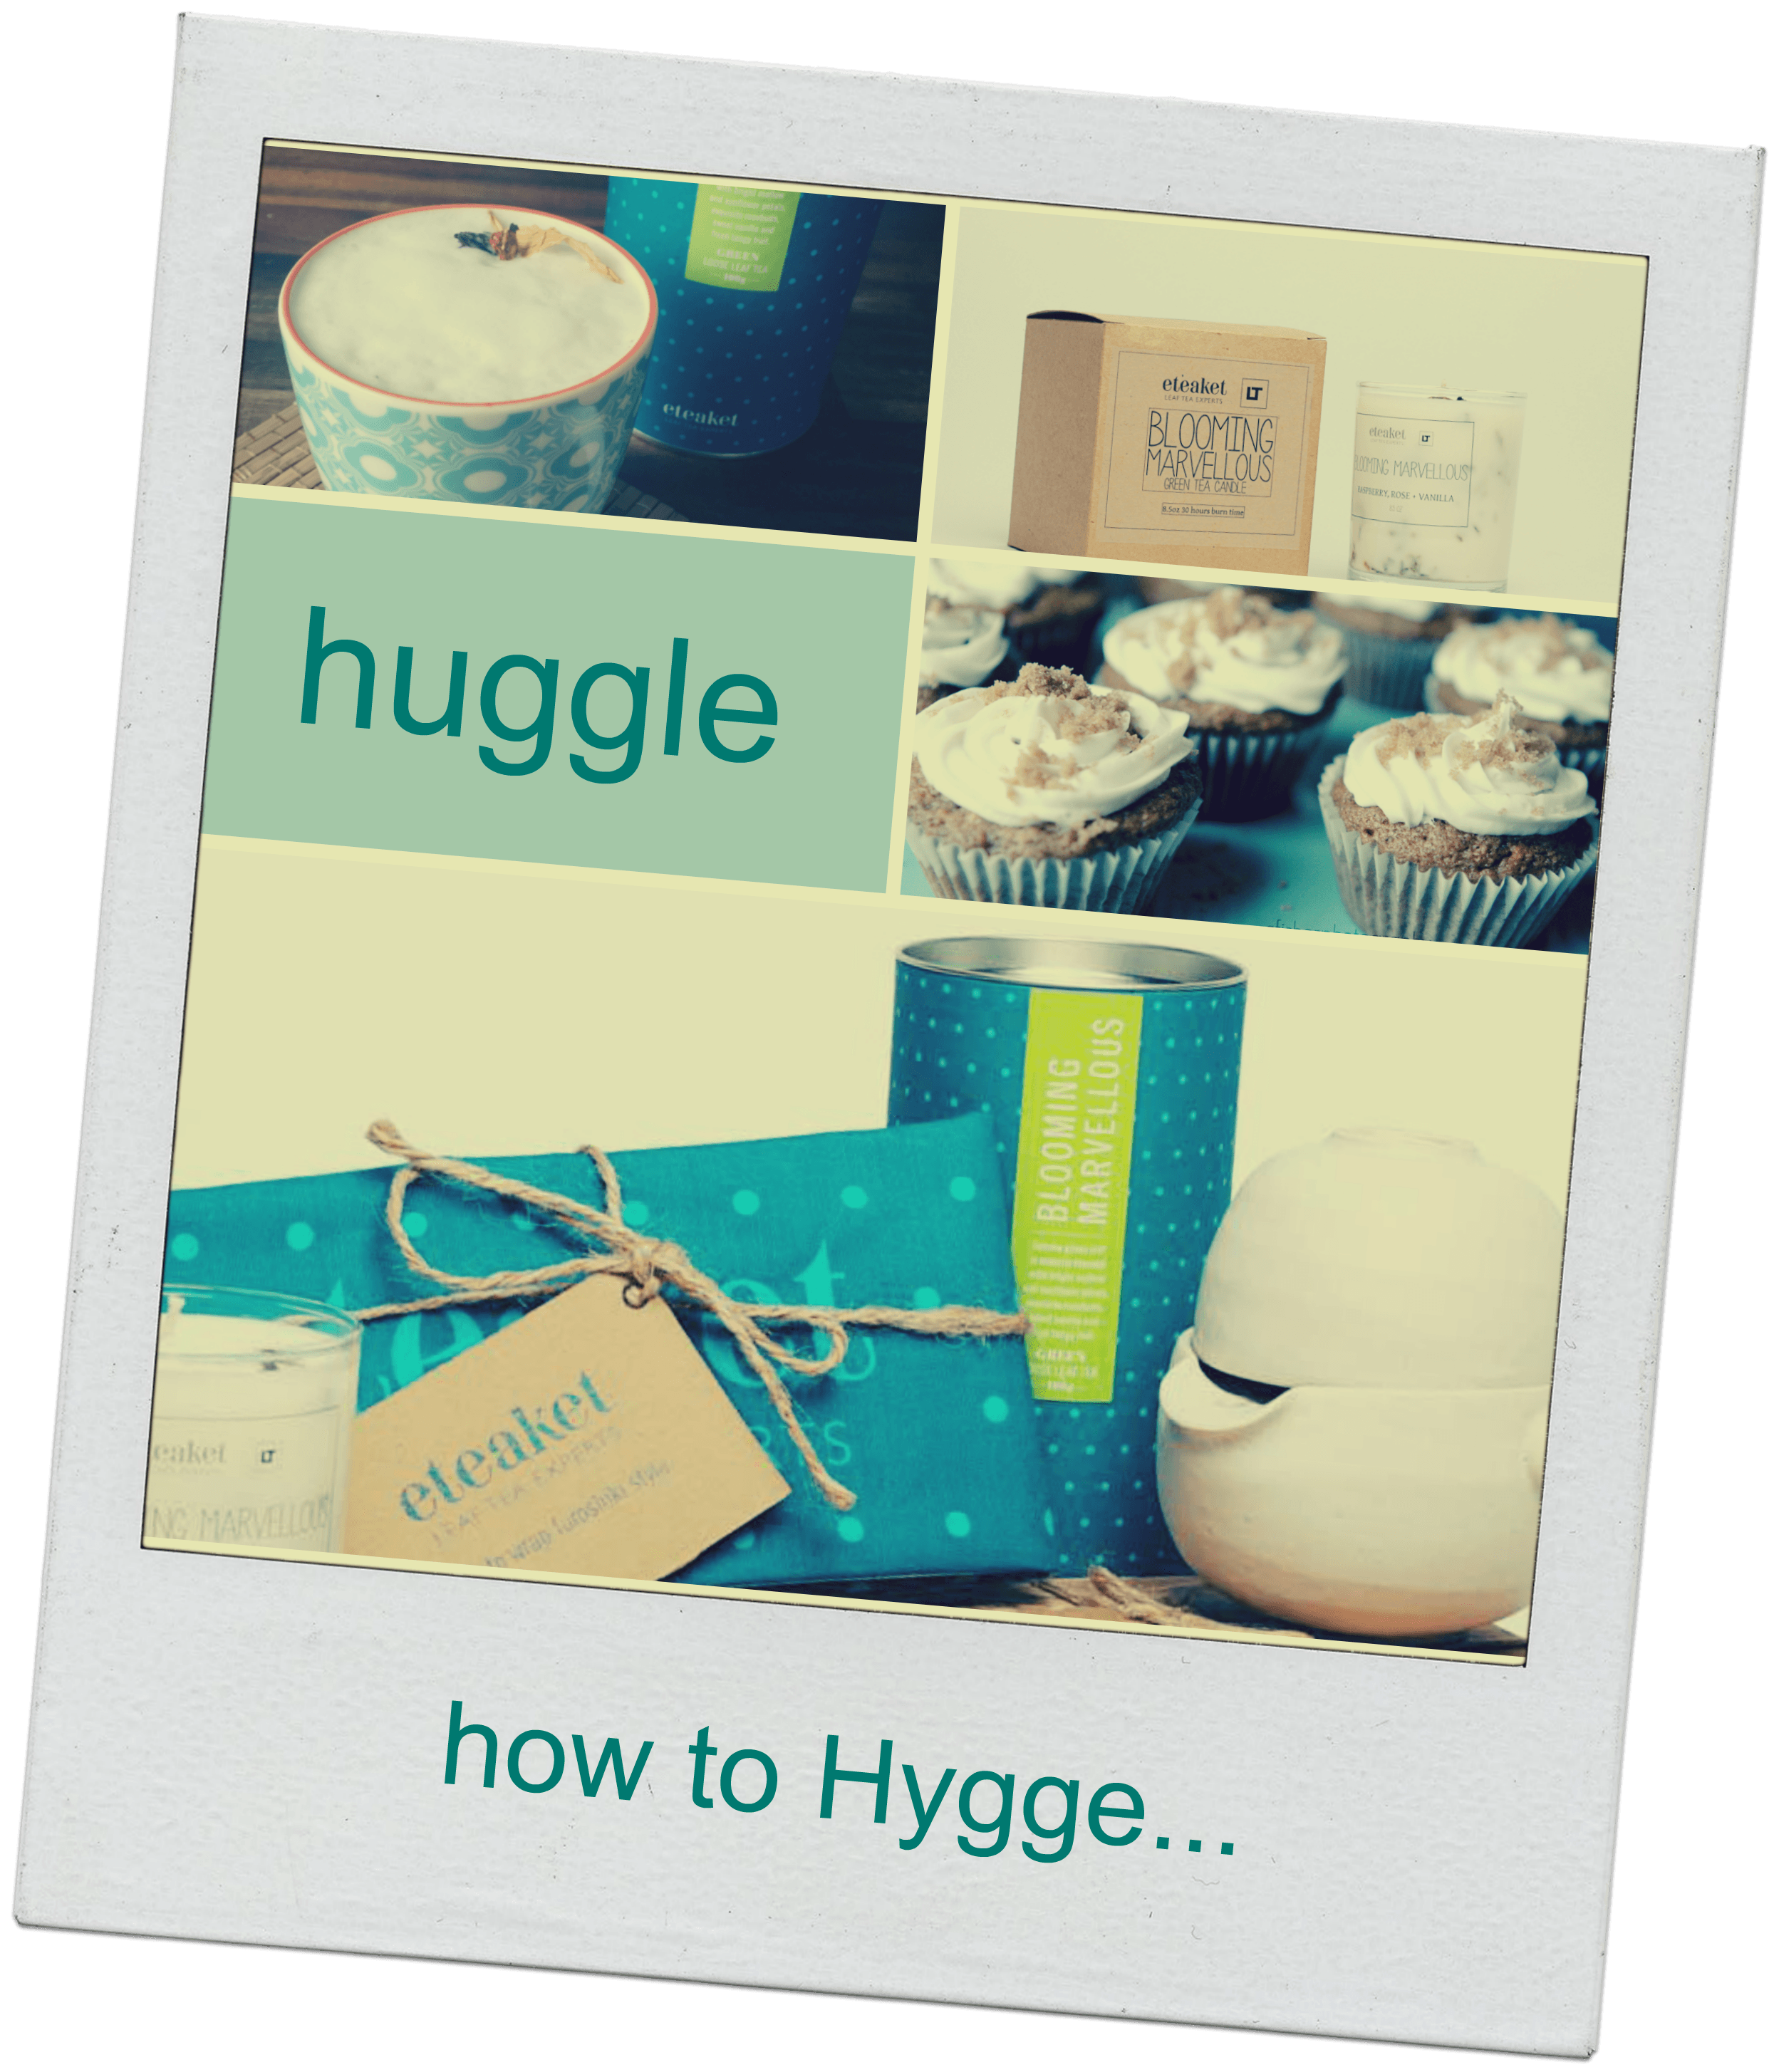 How to Huggle: eteaket's guide to Hygge